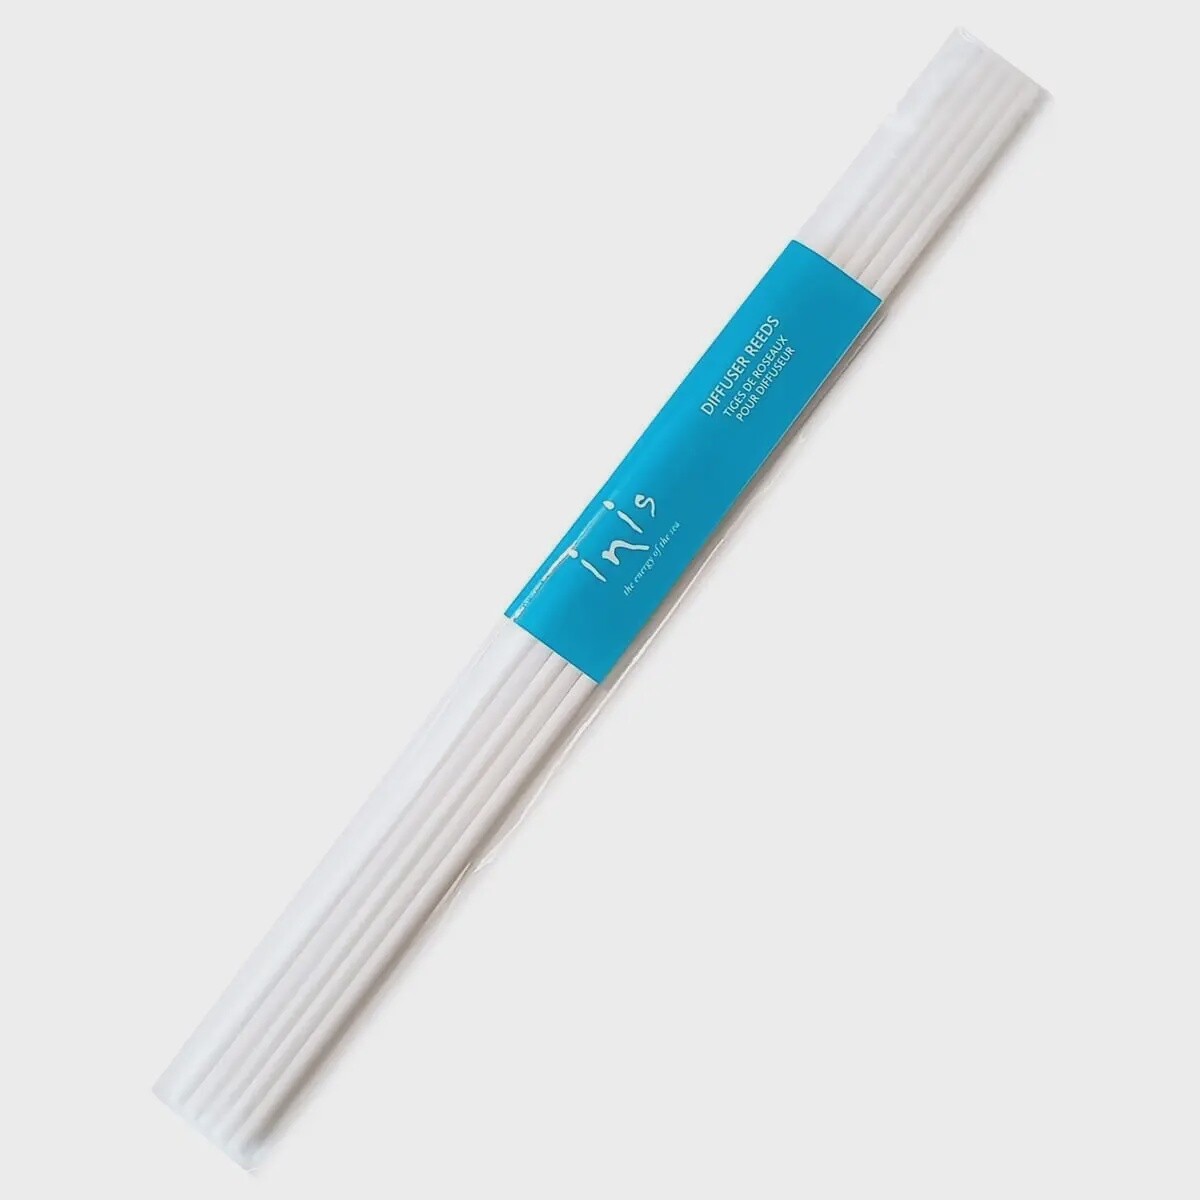 Inis Pack of 5 Diffuser Reeds